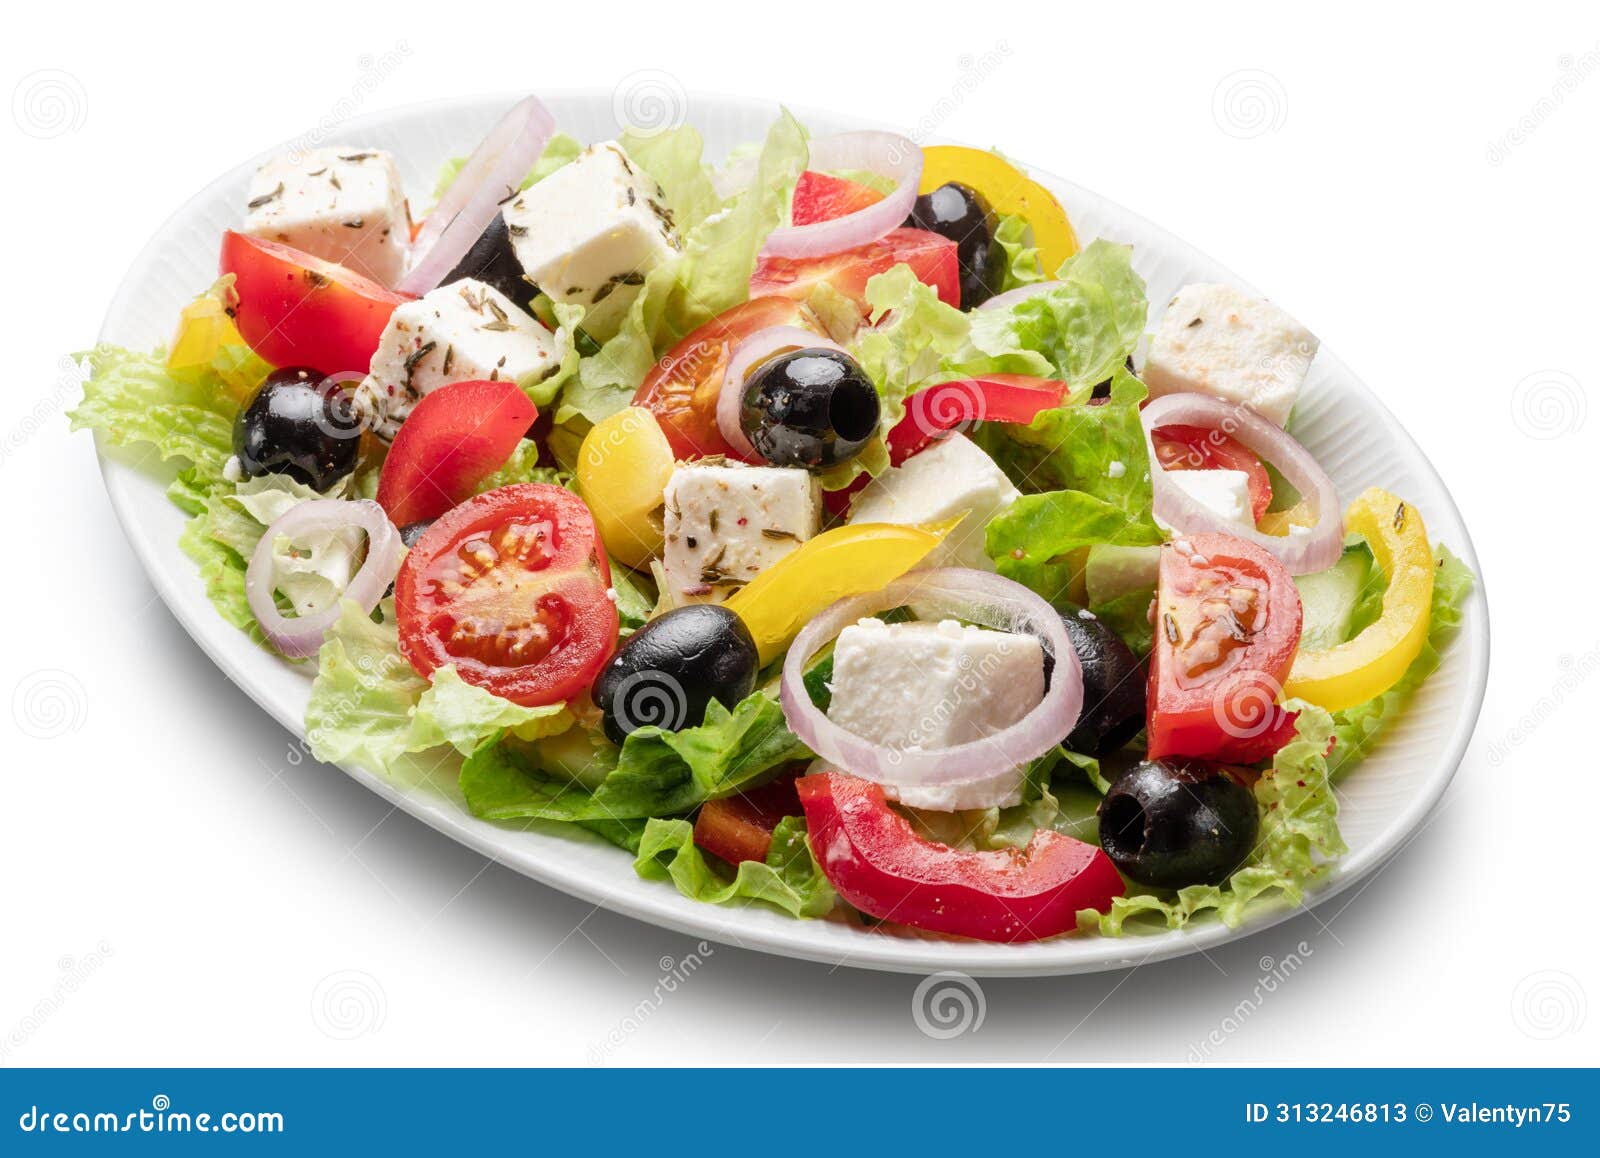 greek salad on white plate  on white background. file contains clipping path